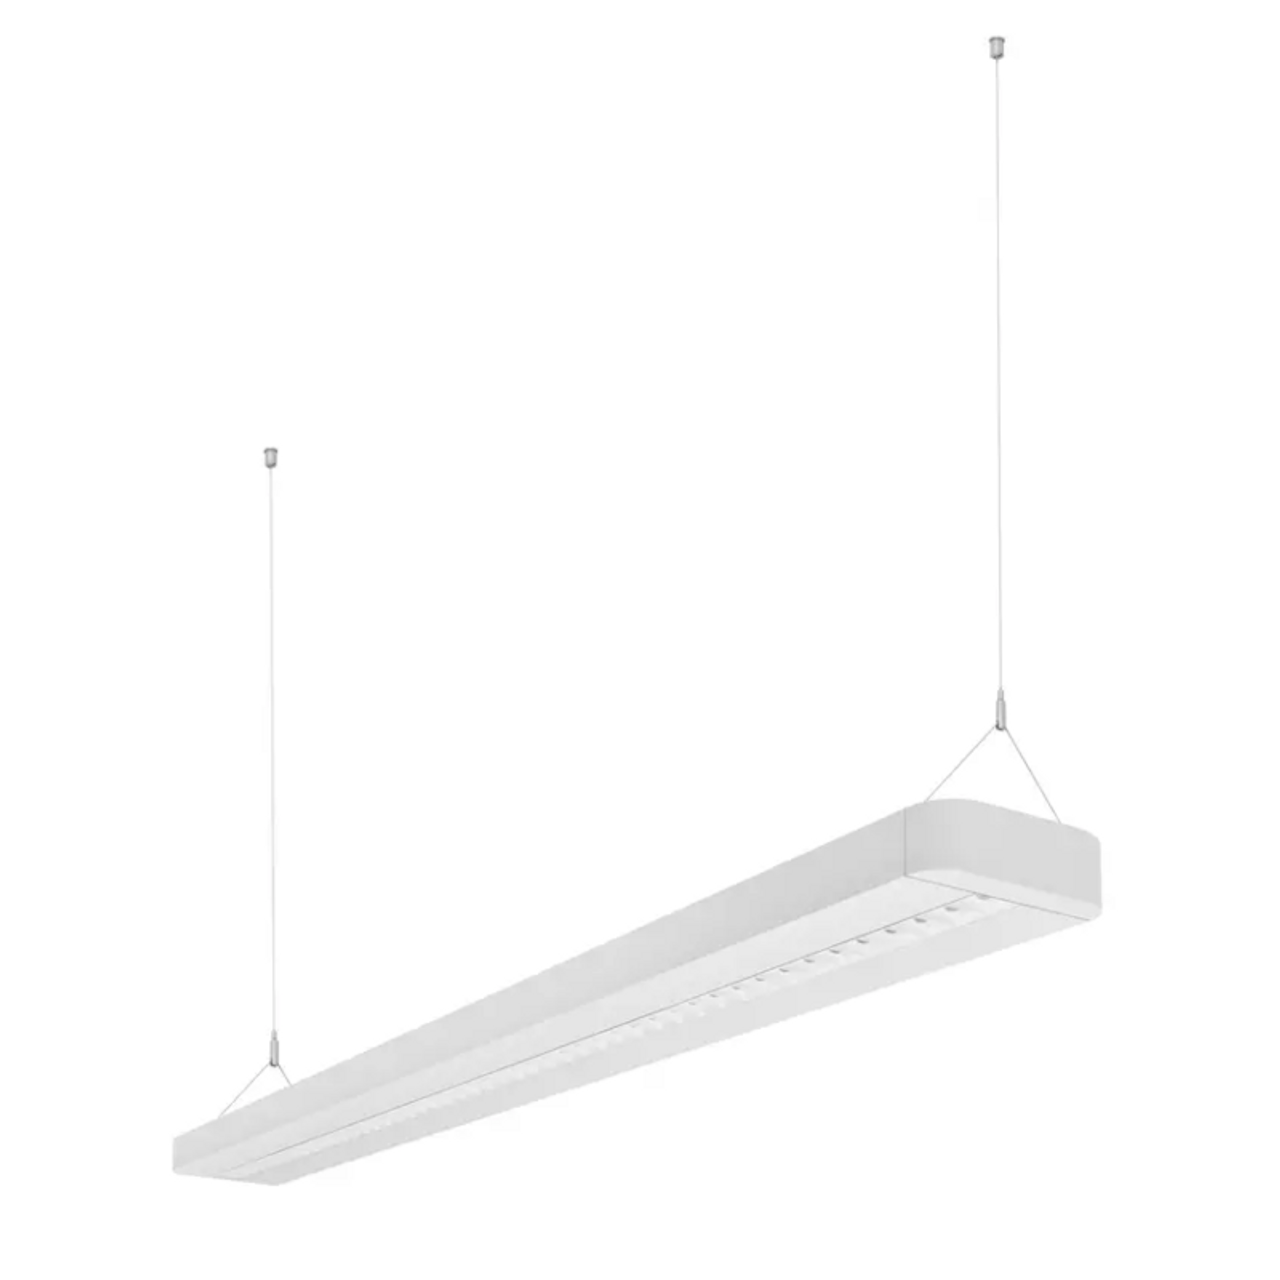 LED Linear Indiviled Direct/Indirect 1500mm 56W 6150lm 3000K White